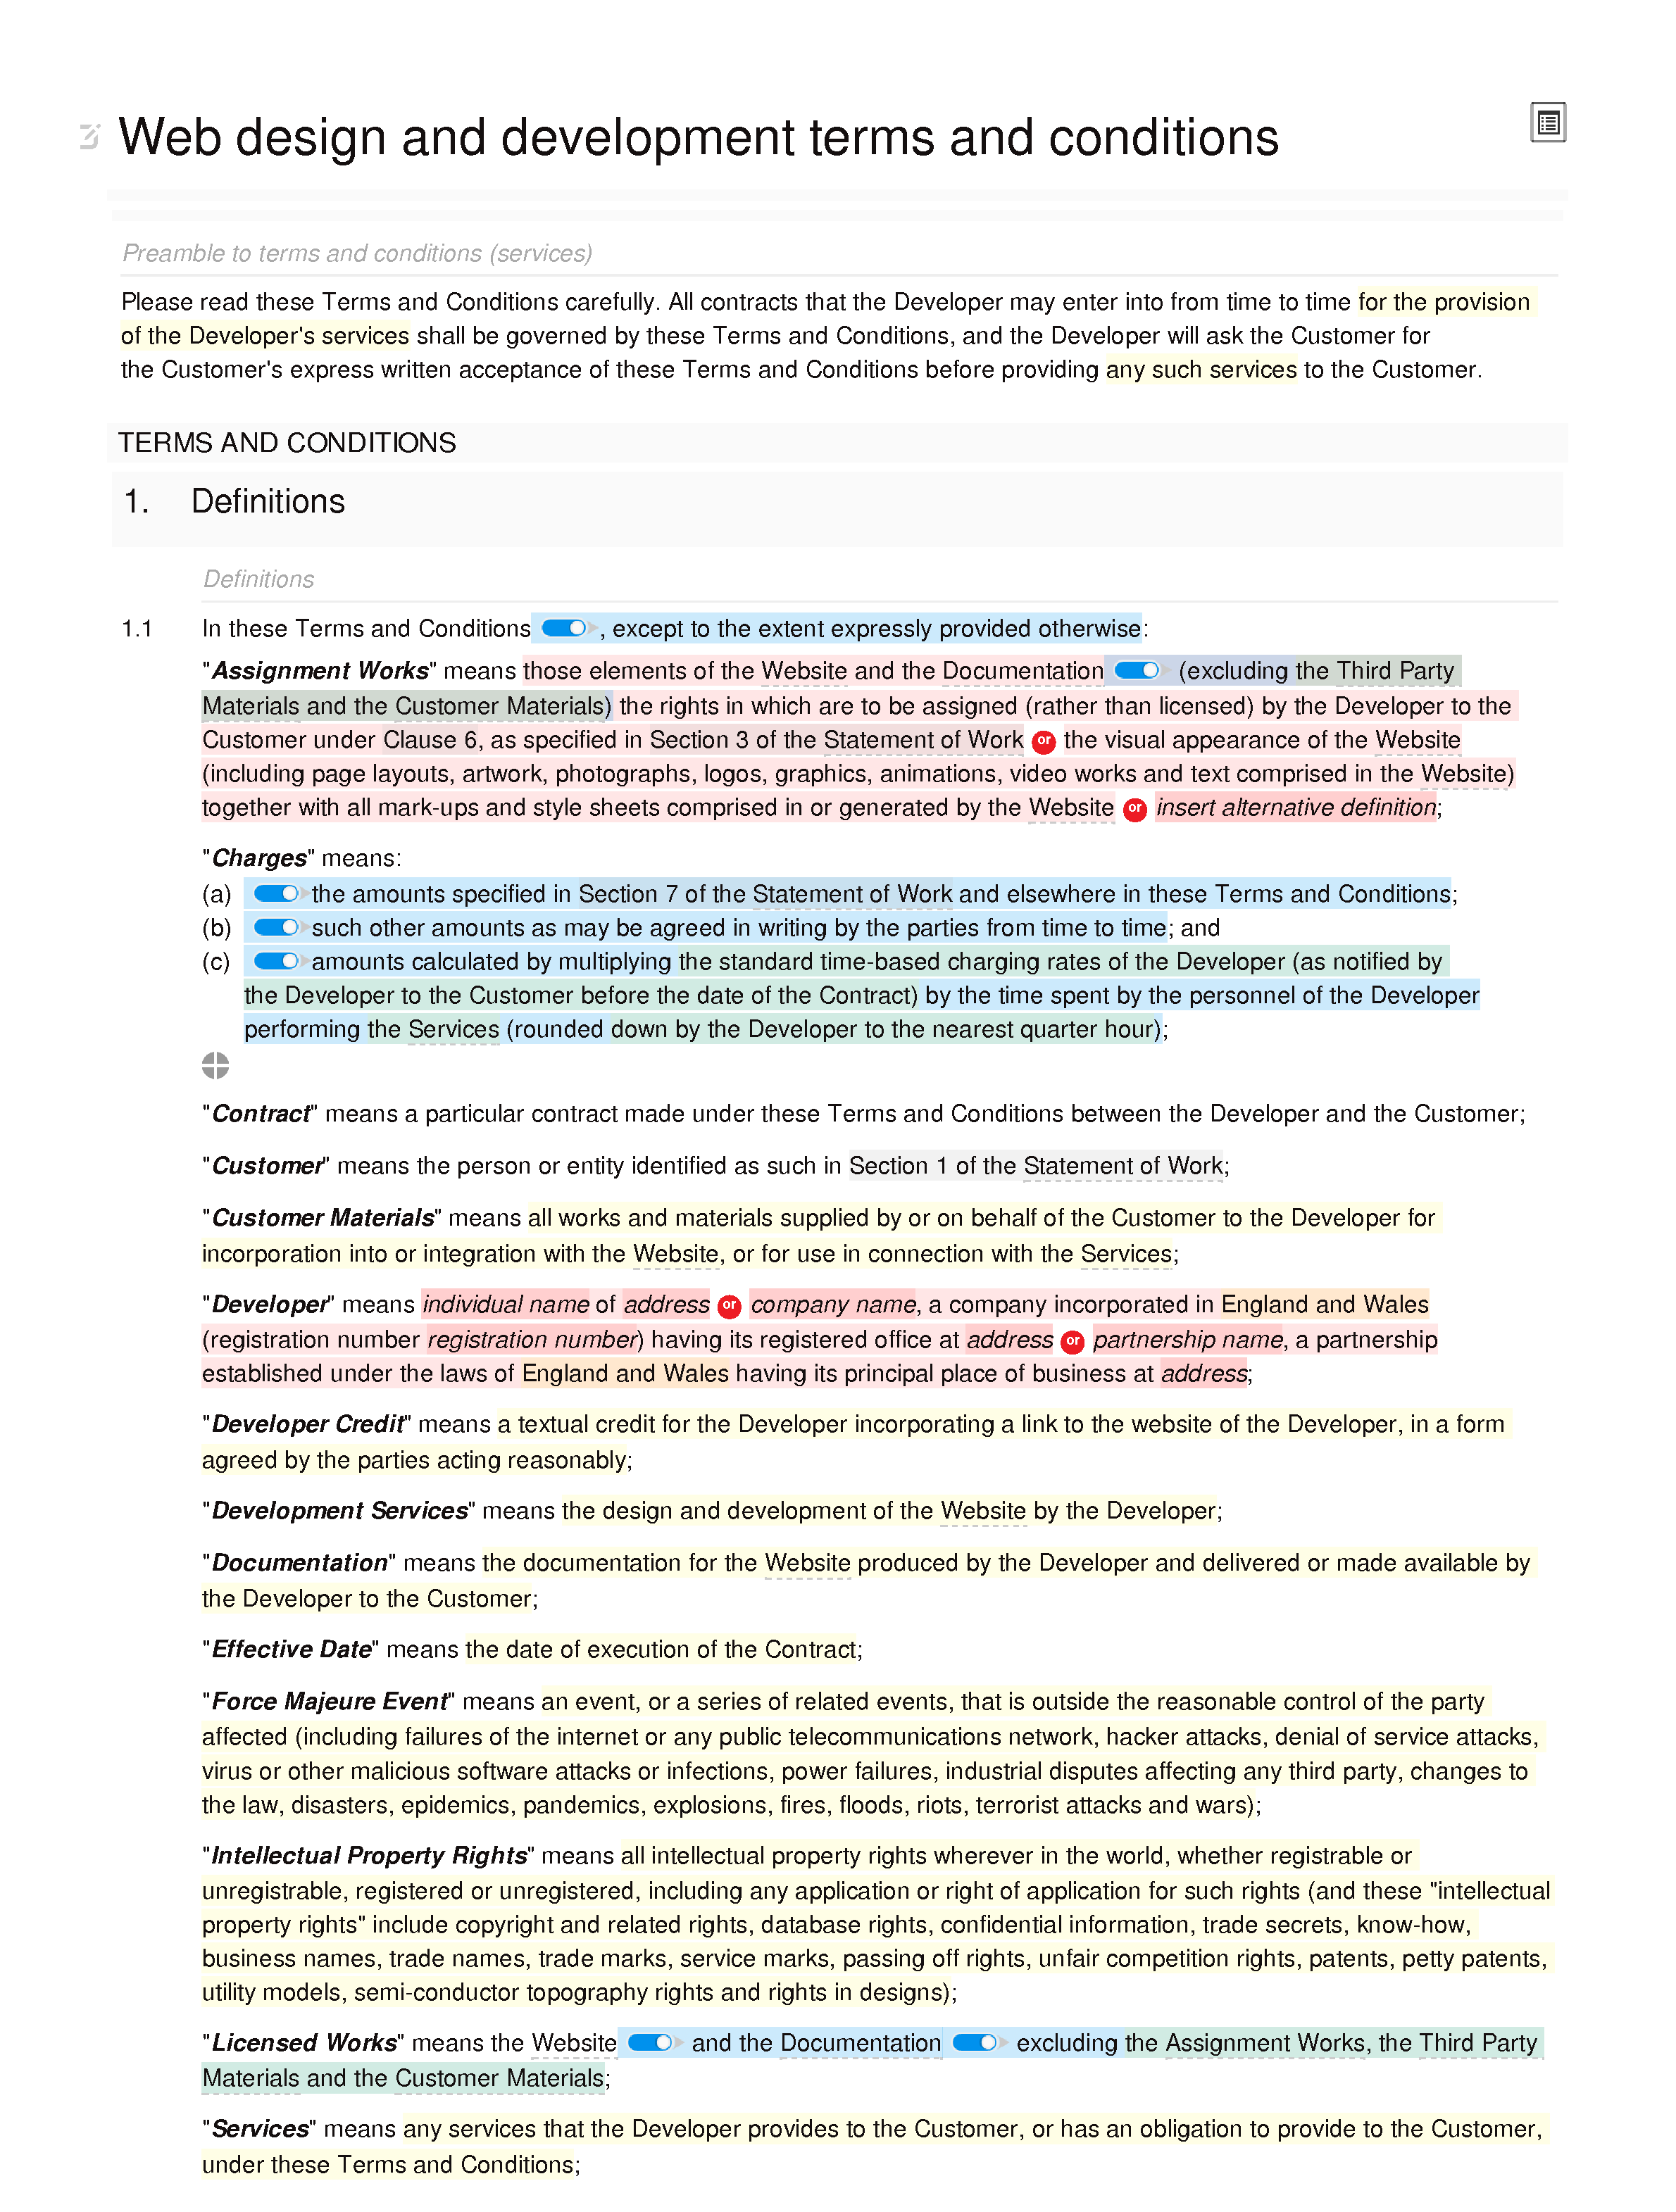 Web design and development terms and conditions (basic) document editor preview